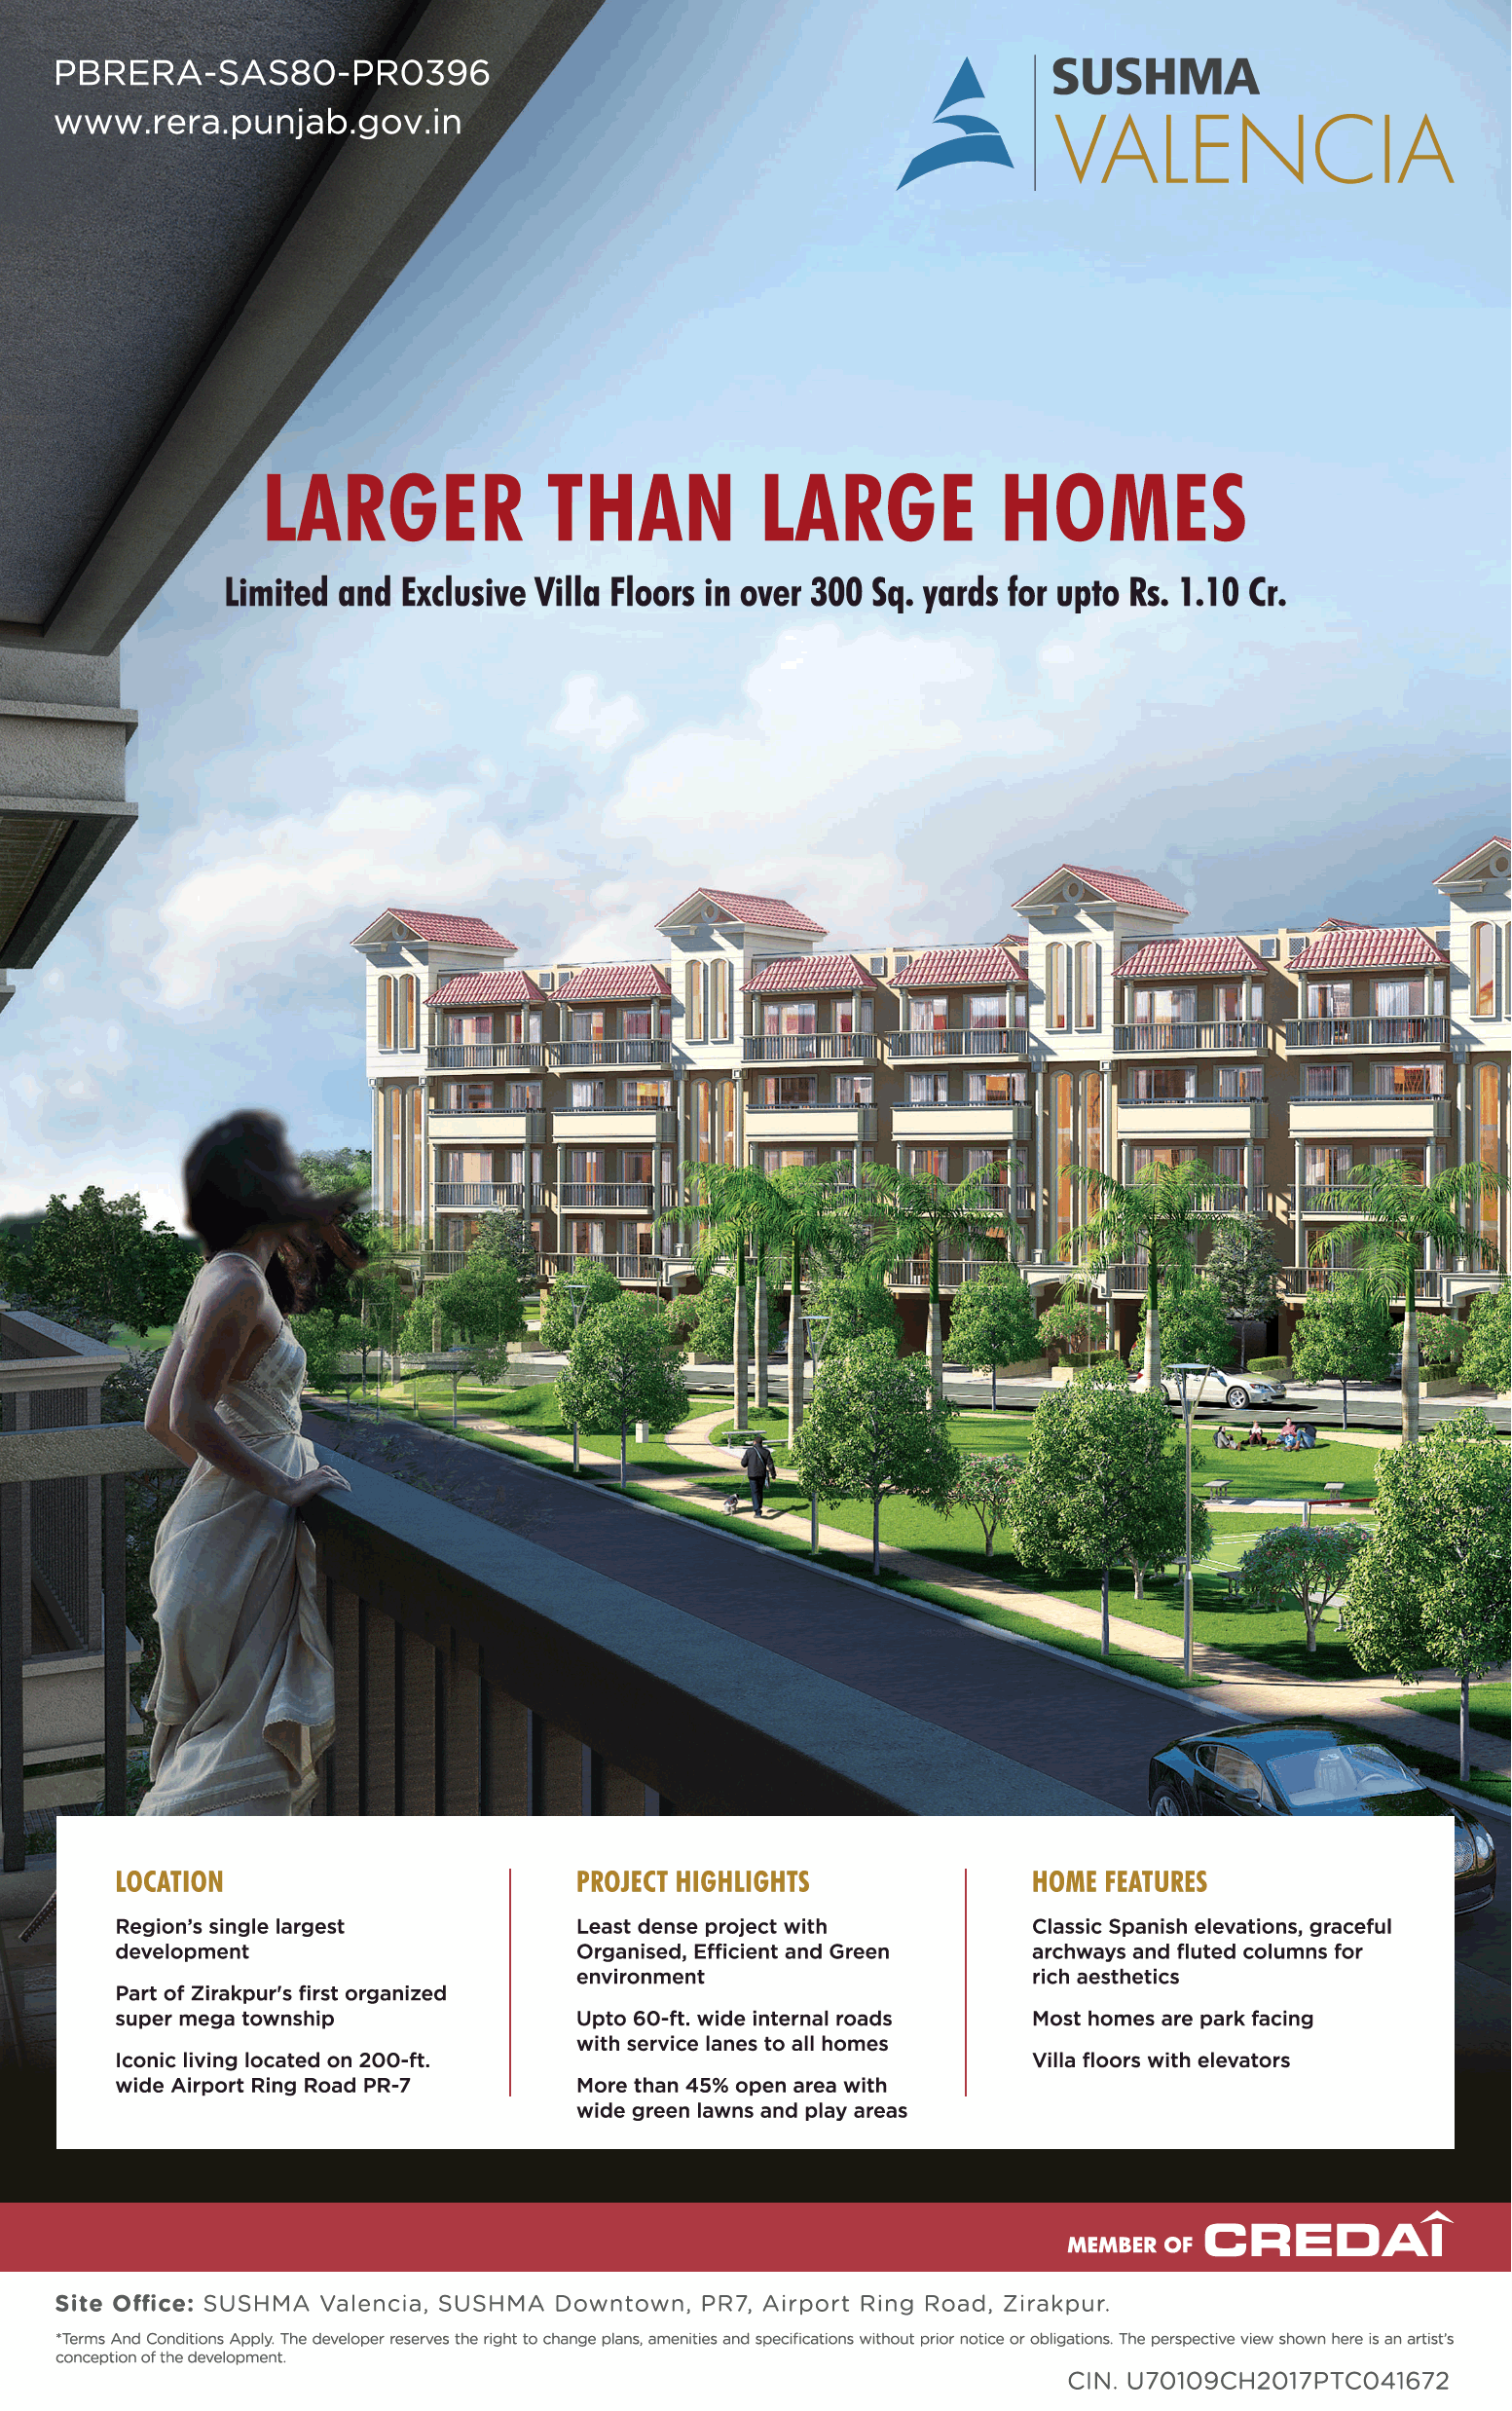 Limited and exclusive villa floors upto Rs. 1.10 cr at Sushma Valencia, Chandigarh Update